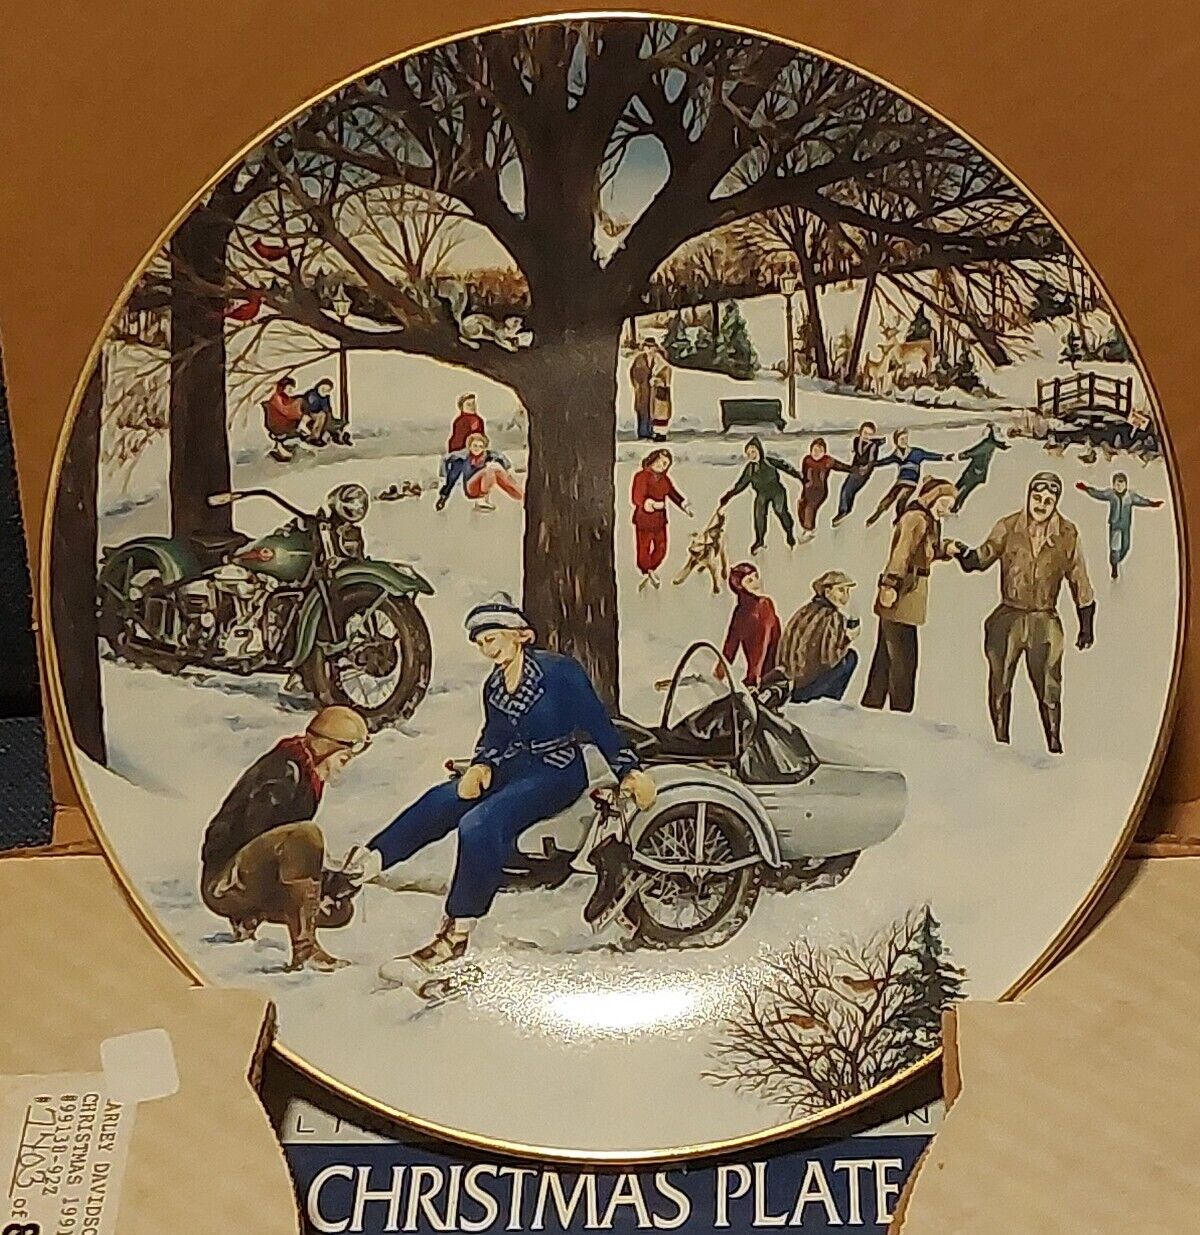 1991 HARLEY DAVIDSON CHRISTMAS PLATE VINTAGE AND RARE LTD. EDITION NEW IN BOX